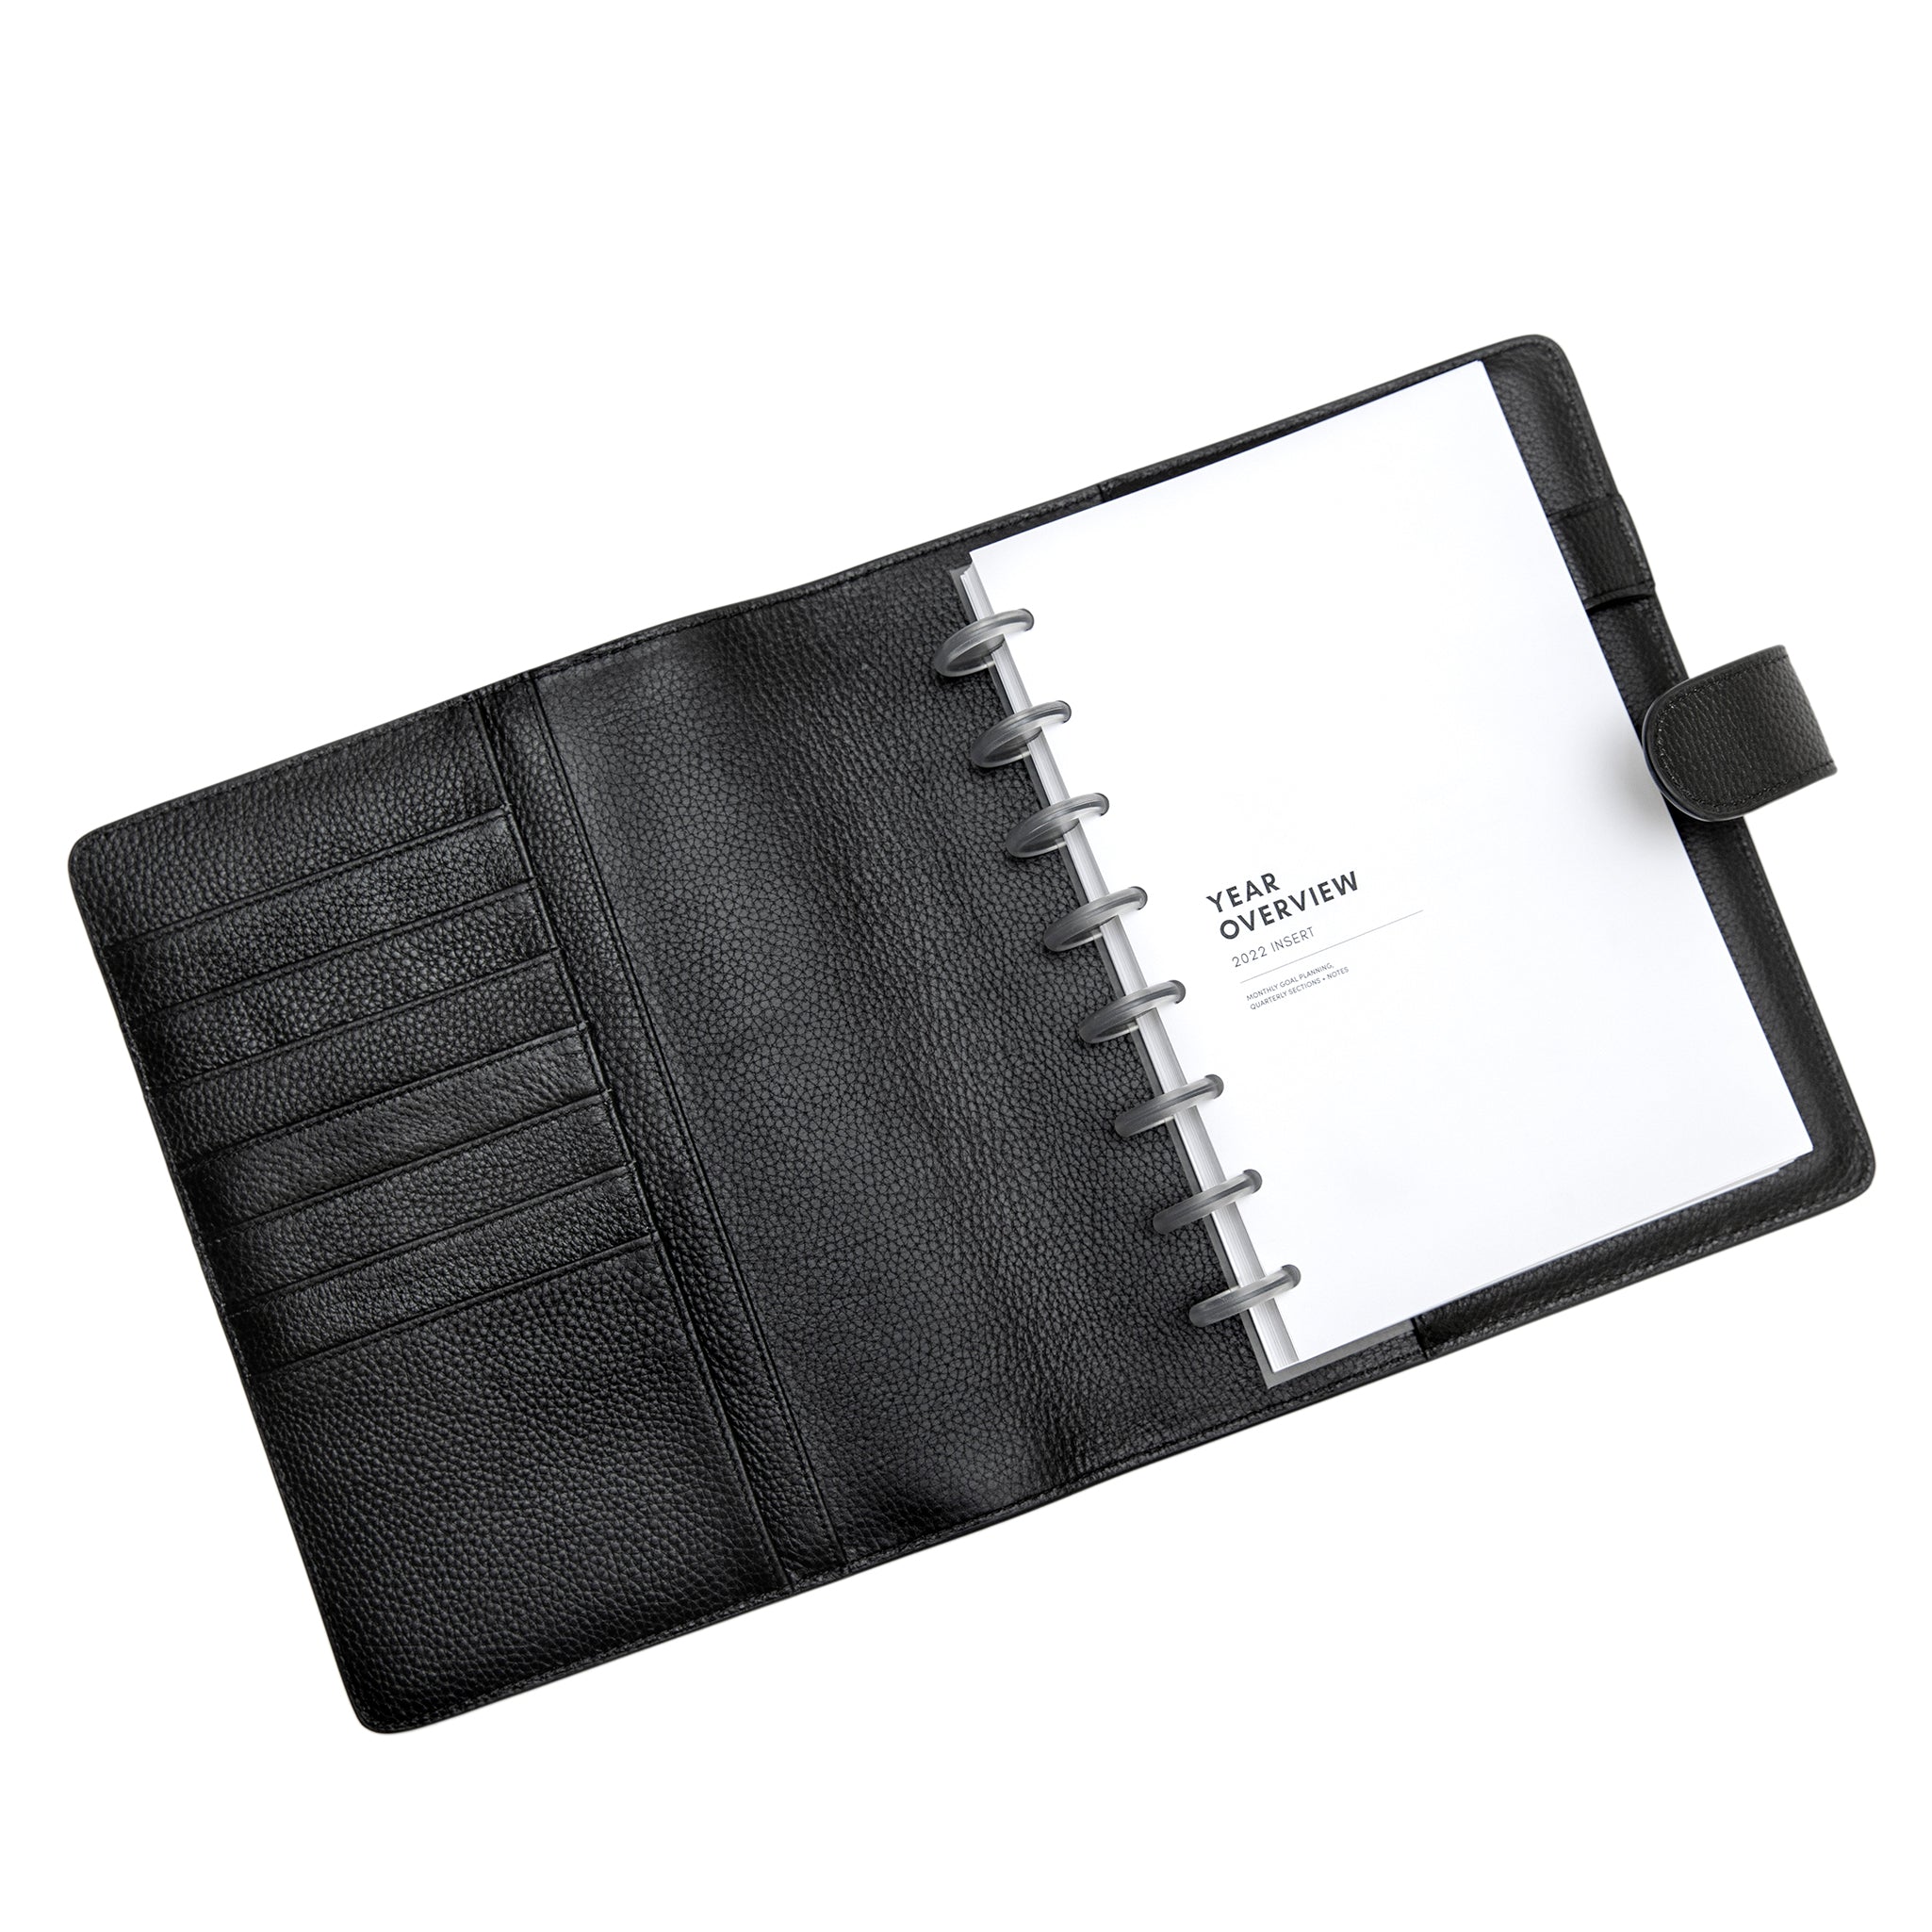 Agenda Cover, Large, Smooth Leather